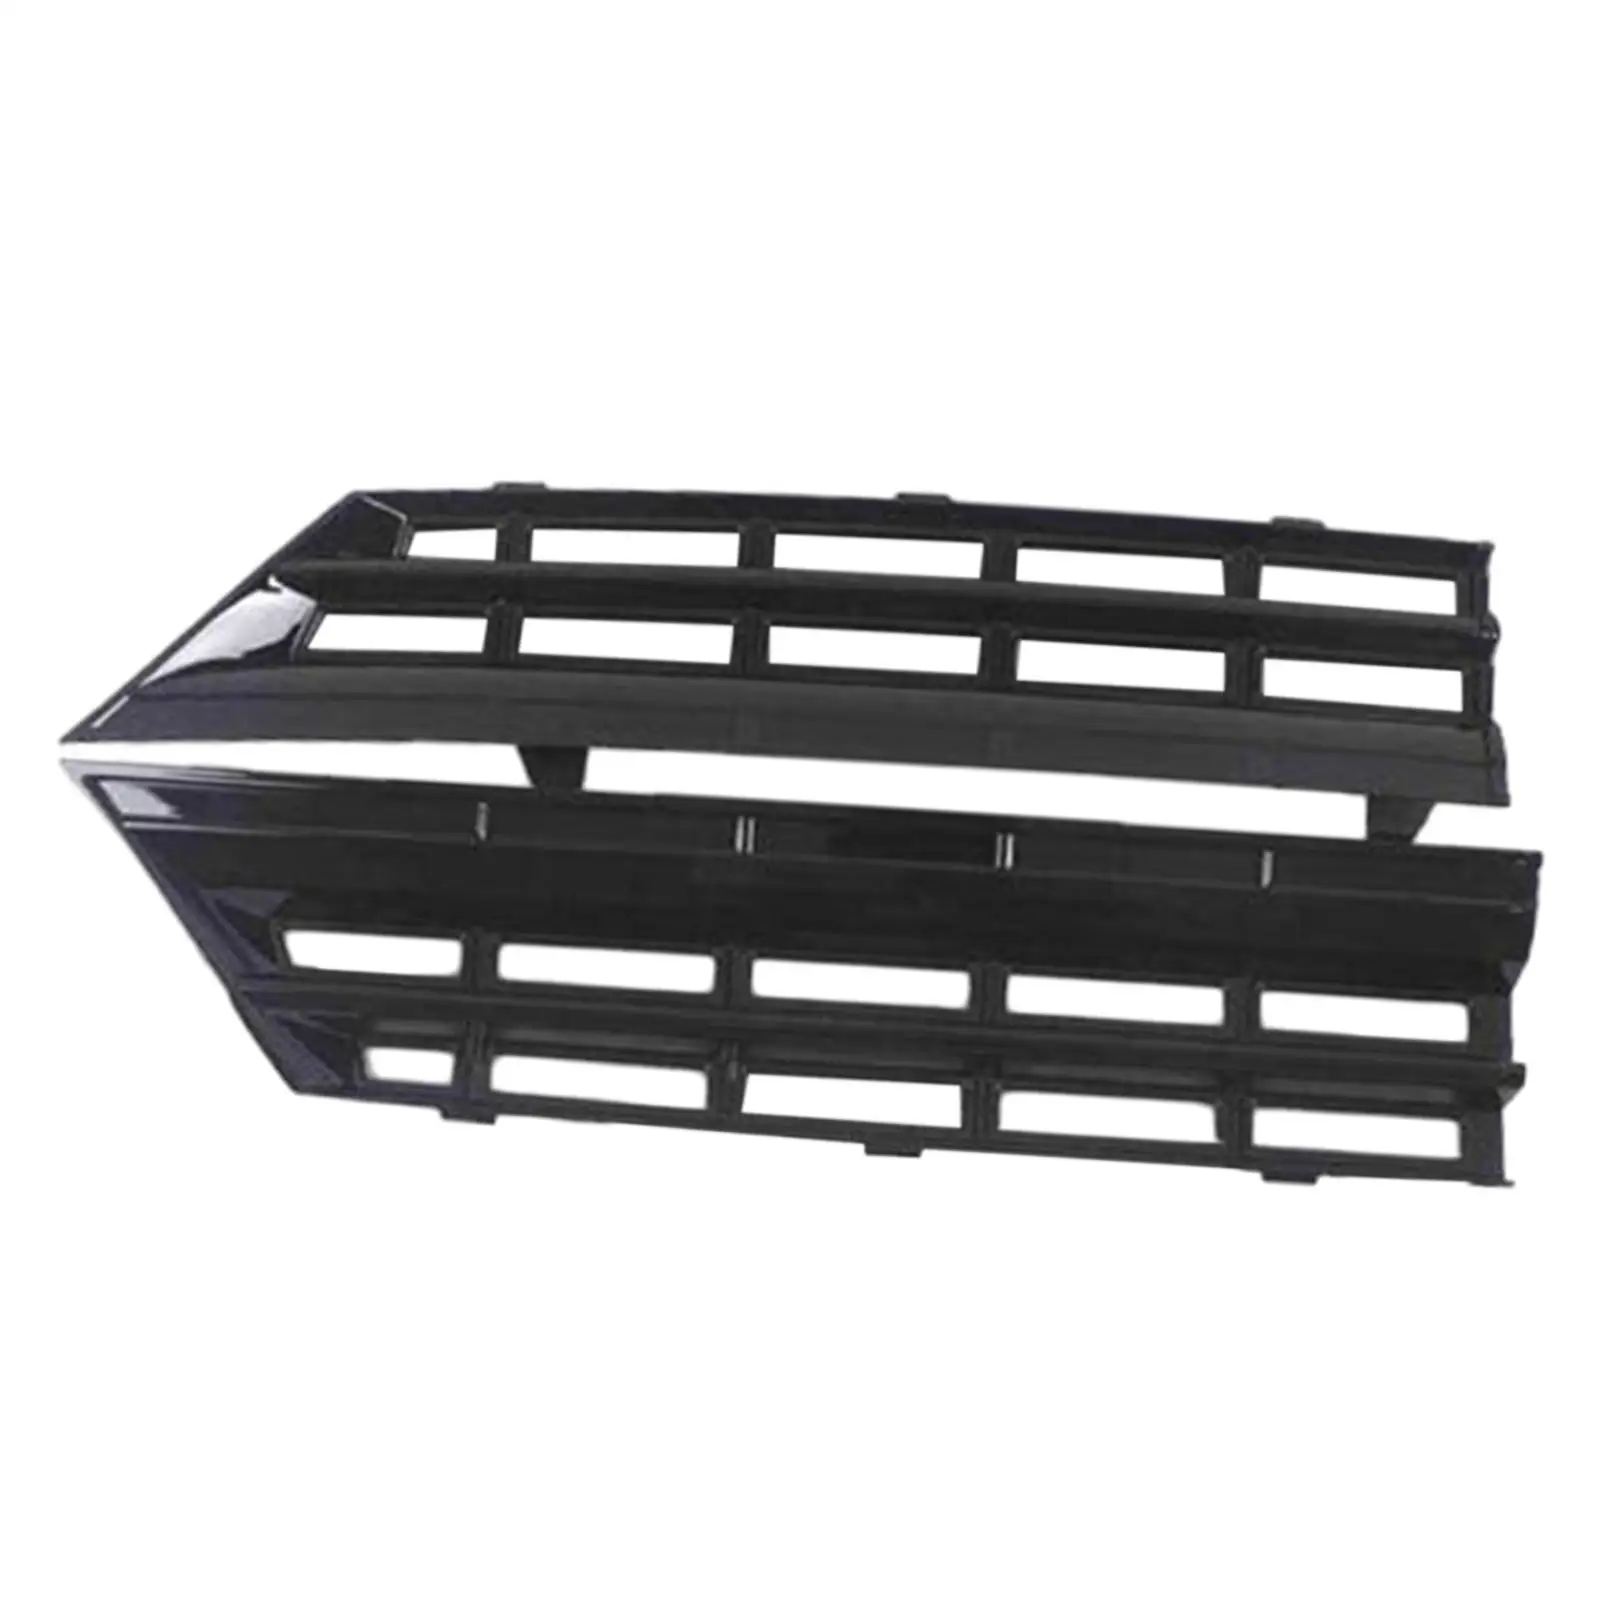 Front Grille Mesh High Performance for Byd Dolphin Auto Accessory